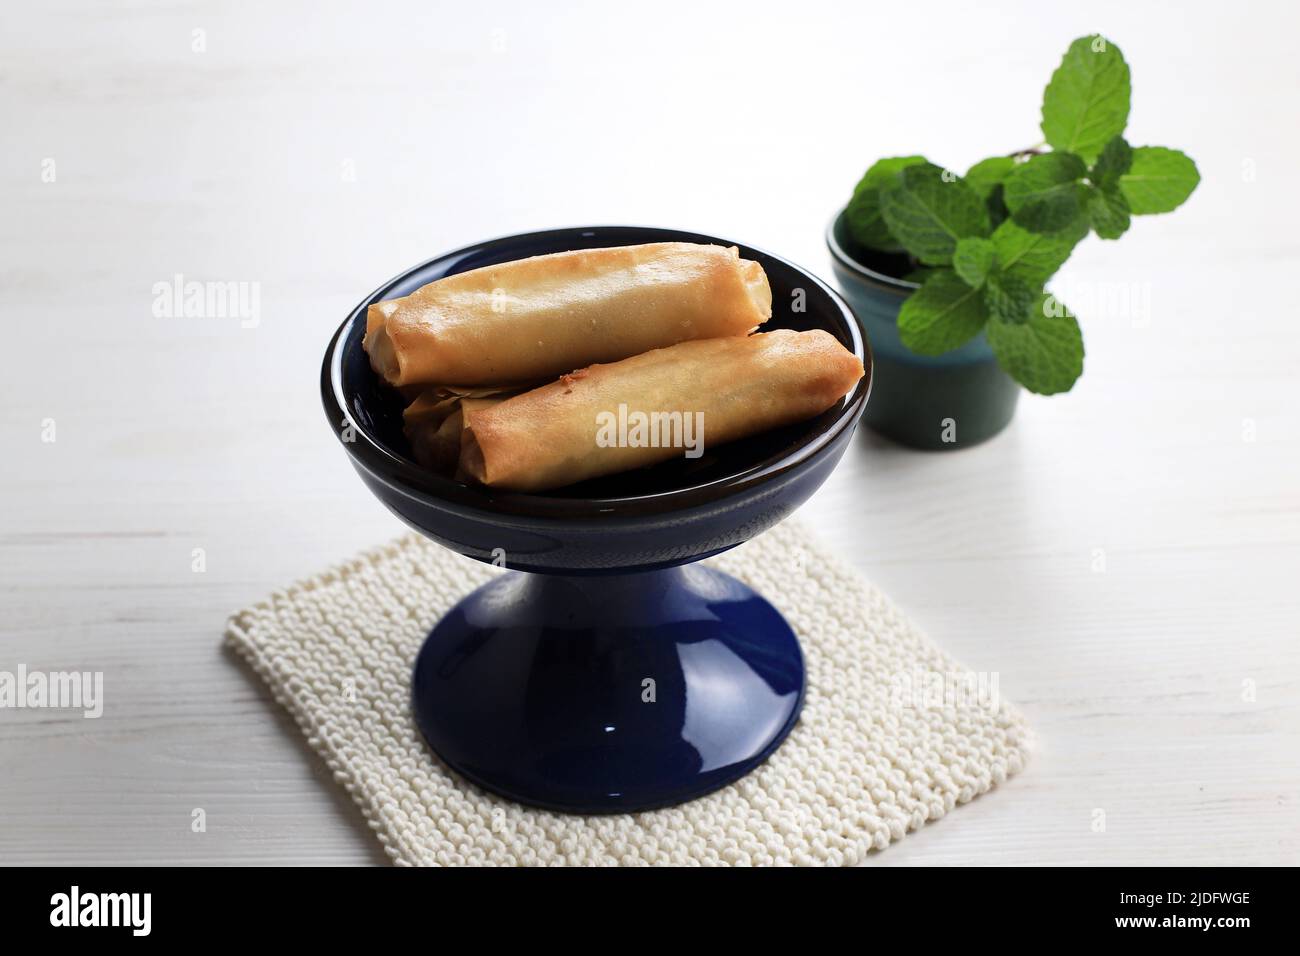 Sweet Spring Roll, Deep Fried Lumpia with Fruit and Banana Inside, on White Table Stock Photo